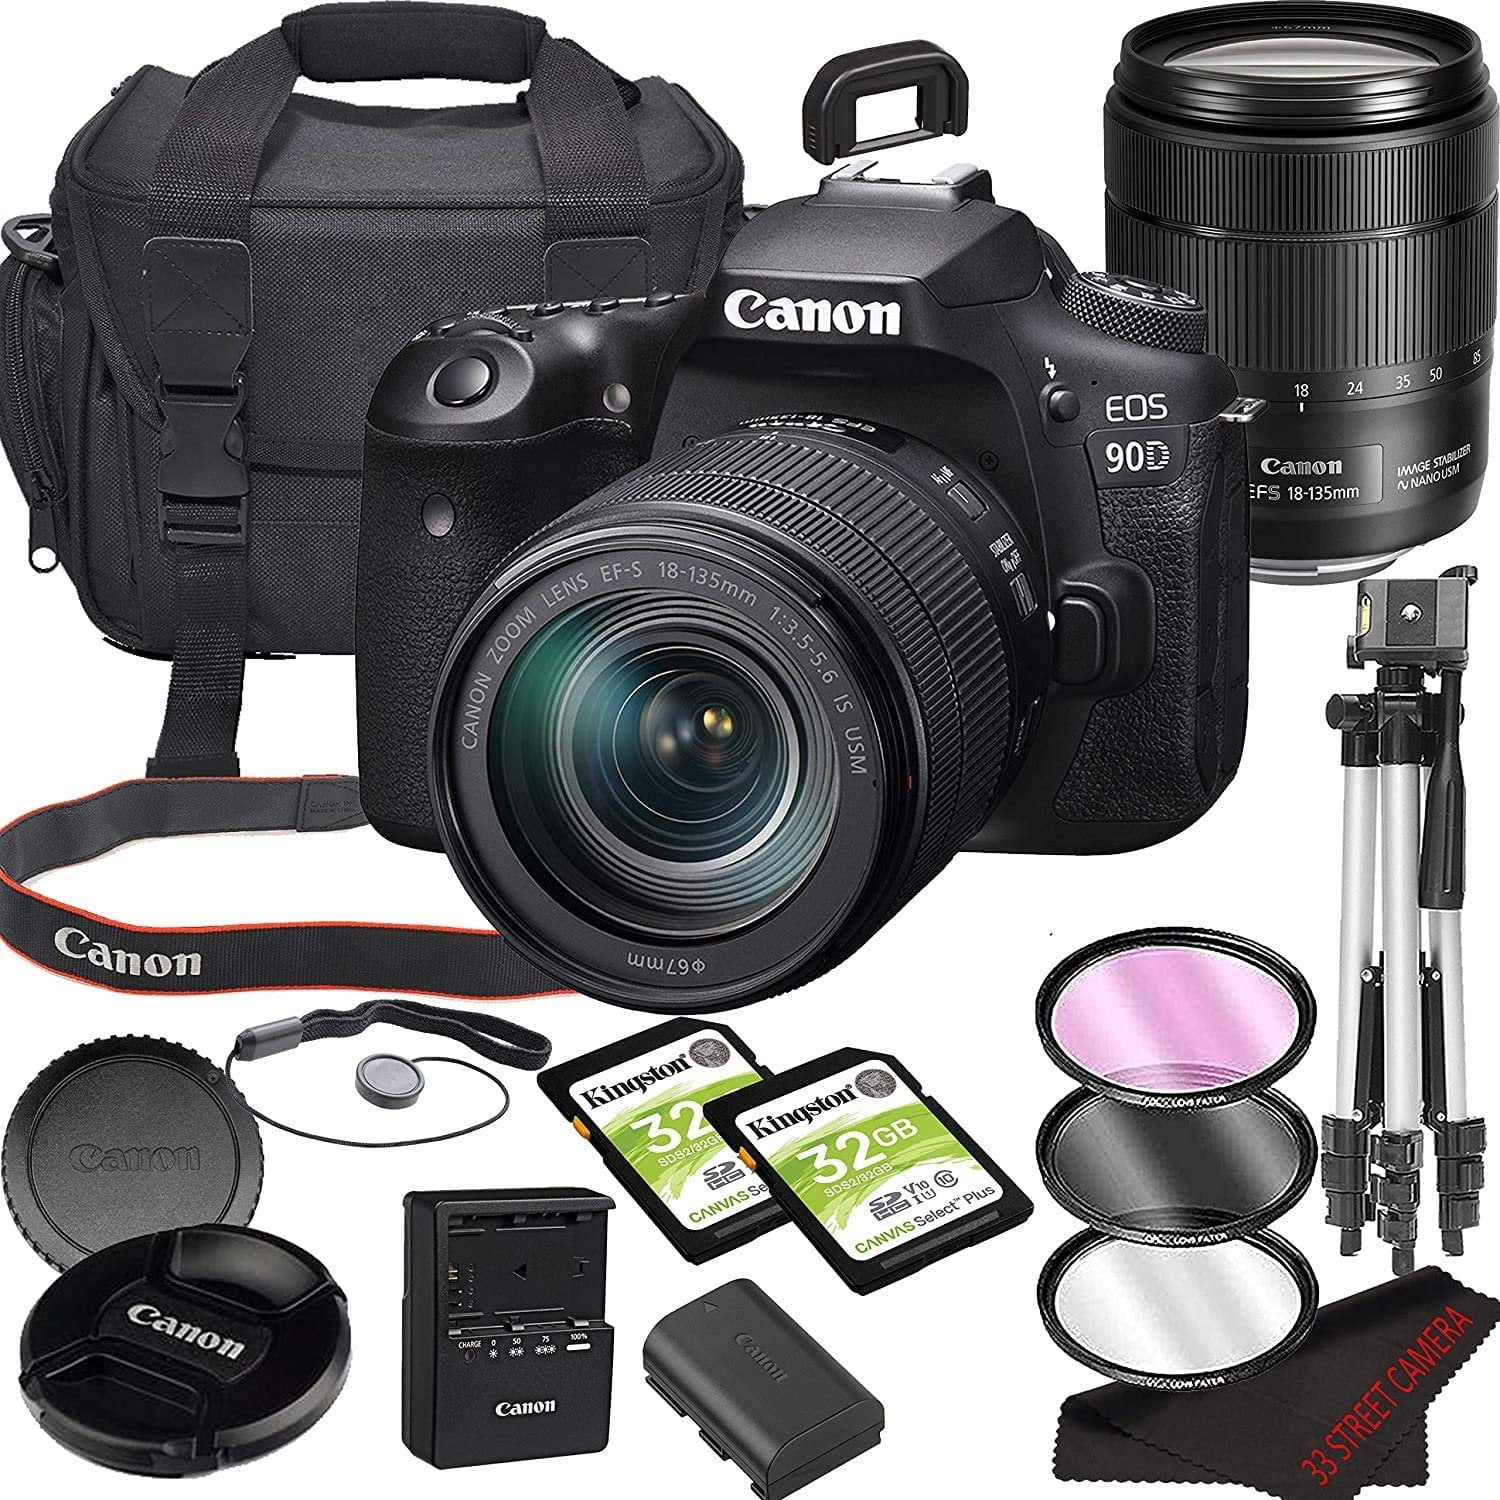 Canon 450d Videocanon Eos 90d 30mp 4k Dslr Camera With Wi-fi For Beginners